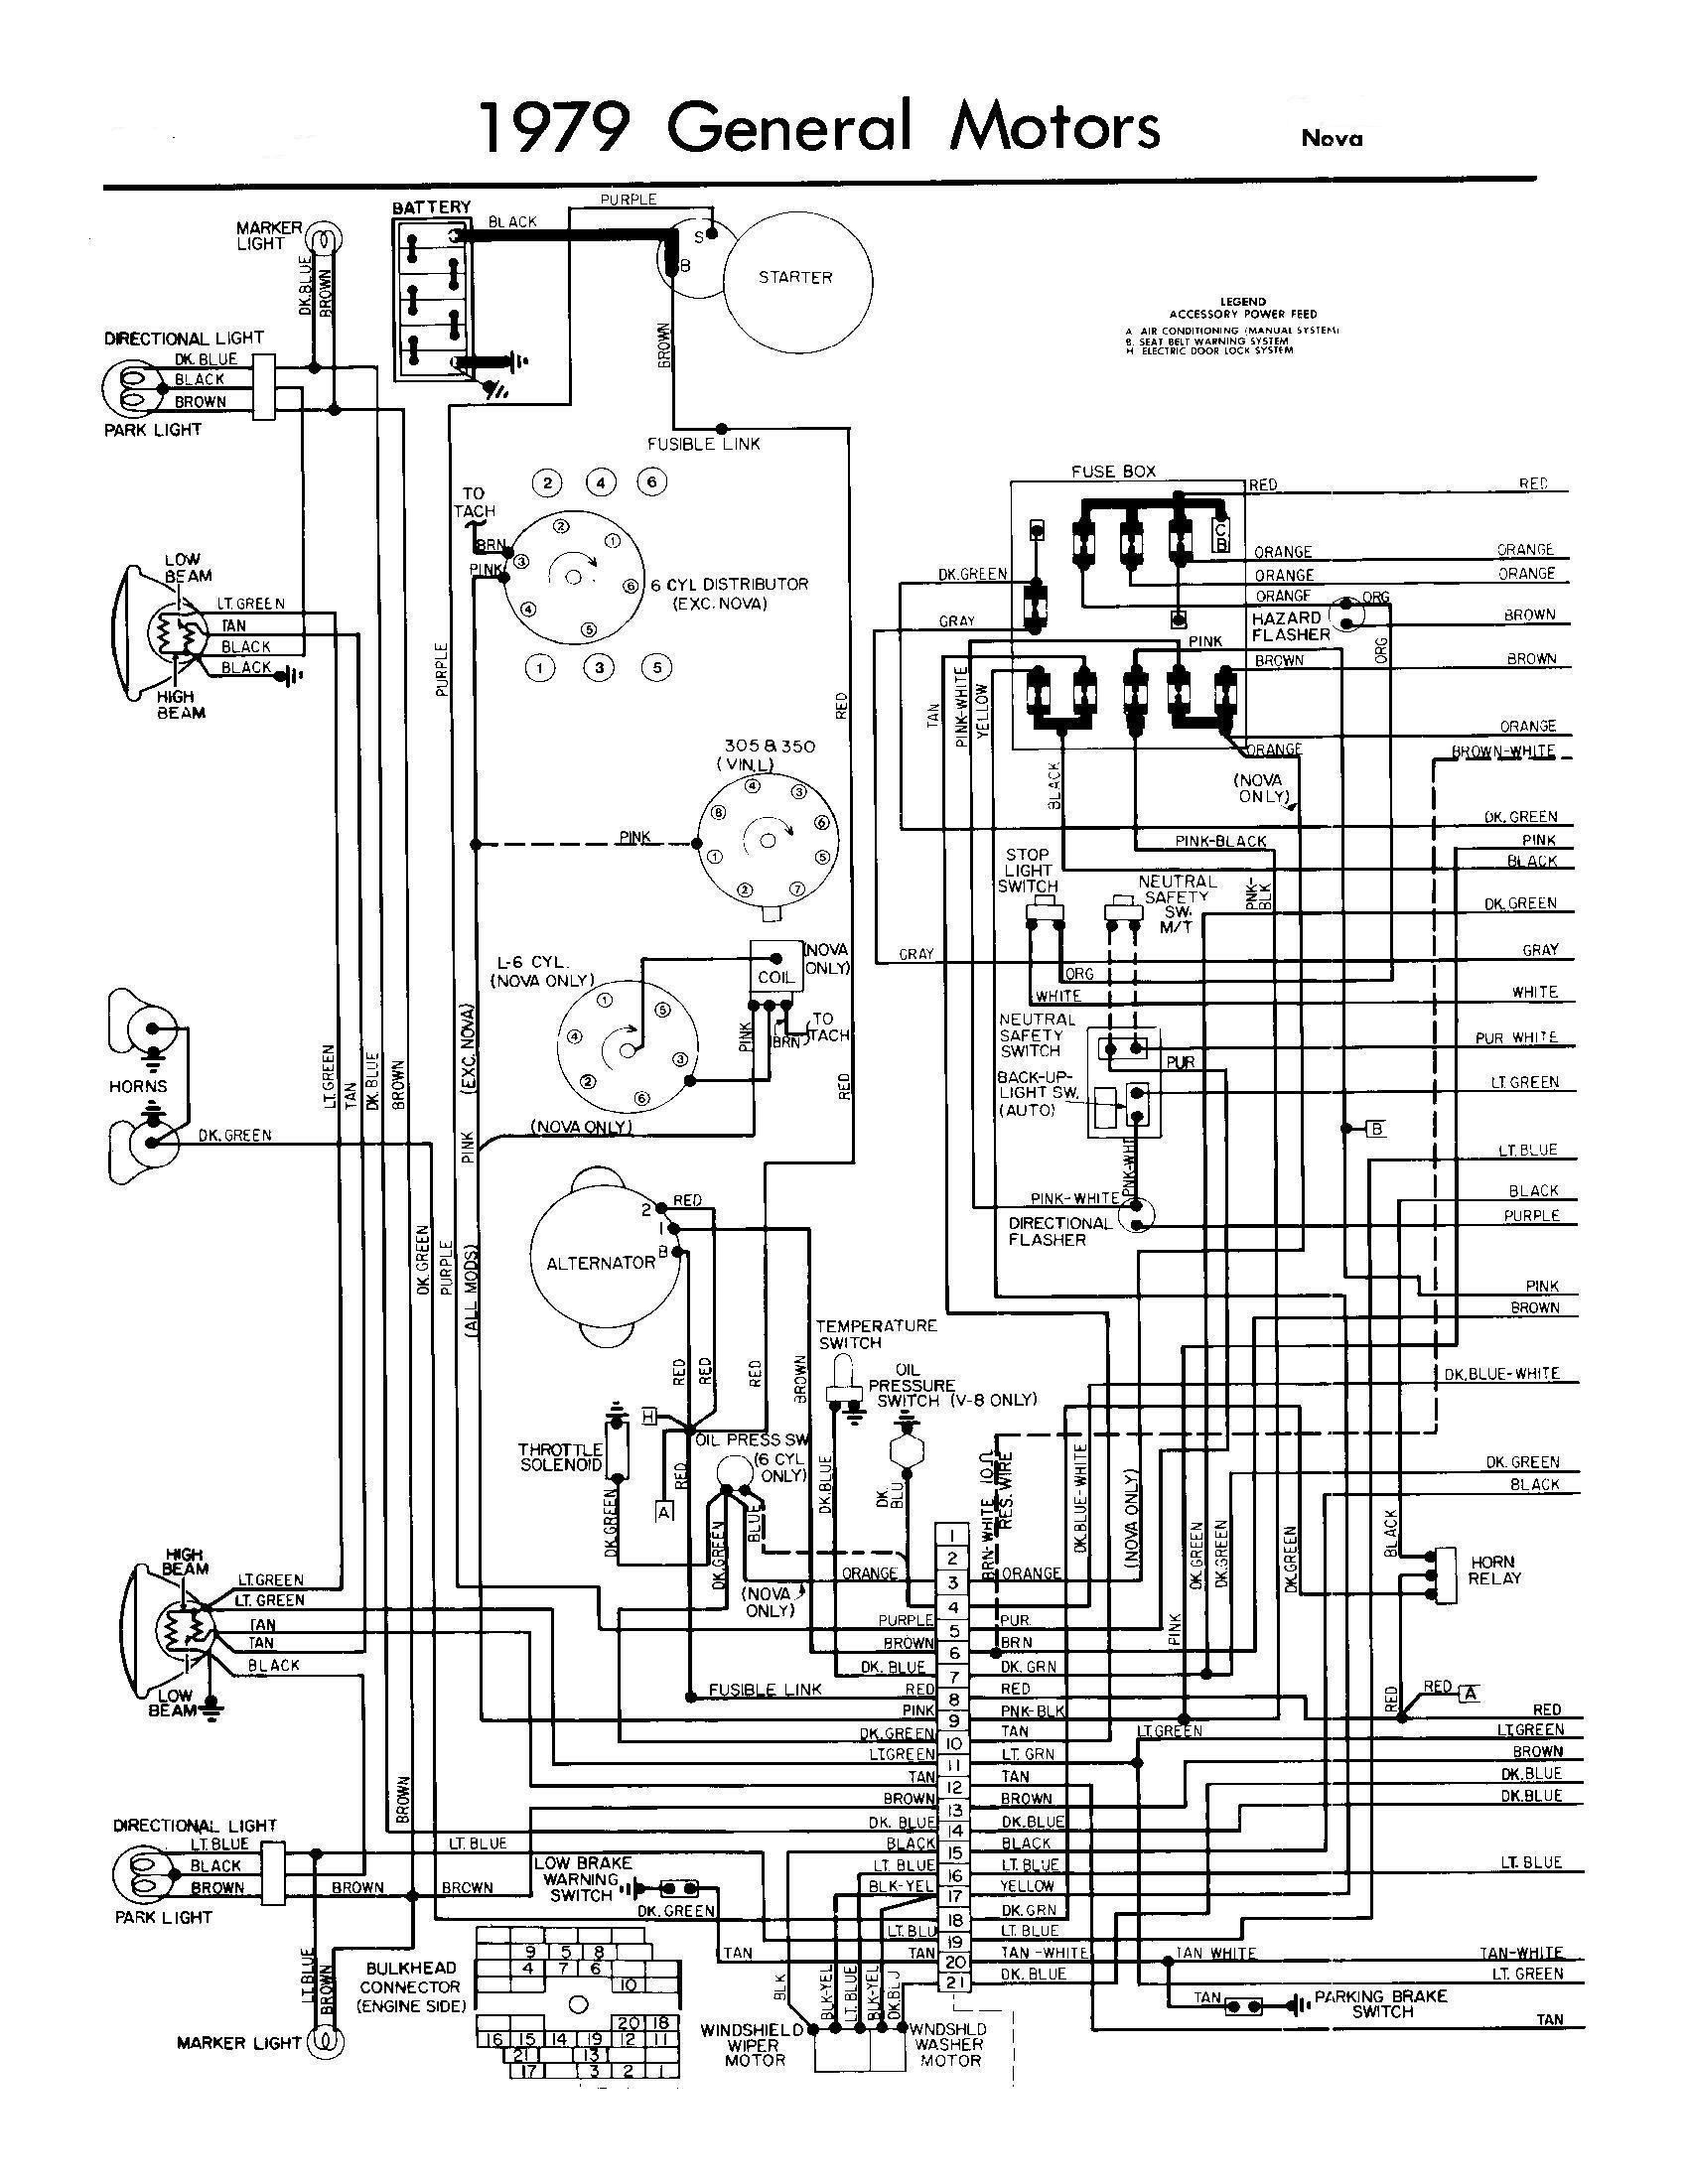 1972 Chevy 350 Ignition Wiring | Wiring Diagram - Chevy 350 Wiring Diagram To Distributor